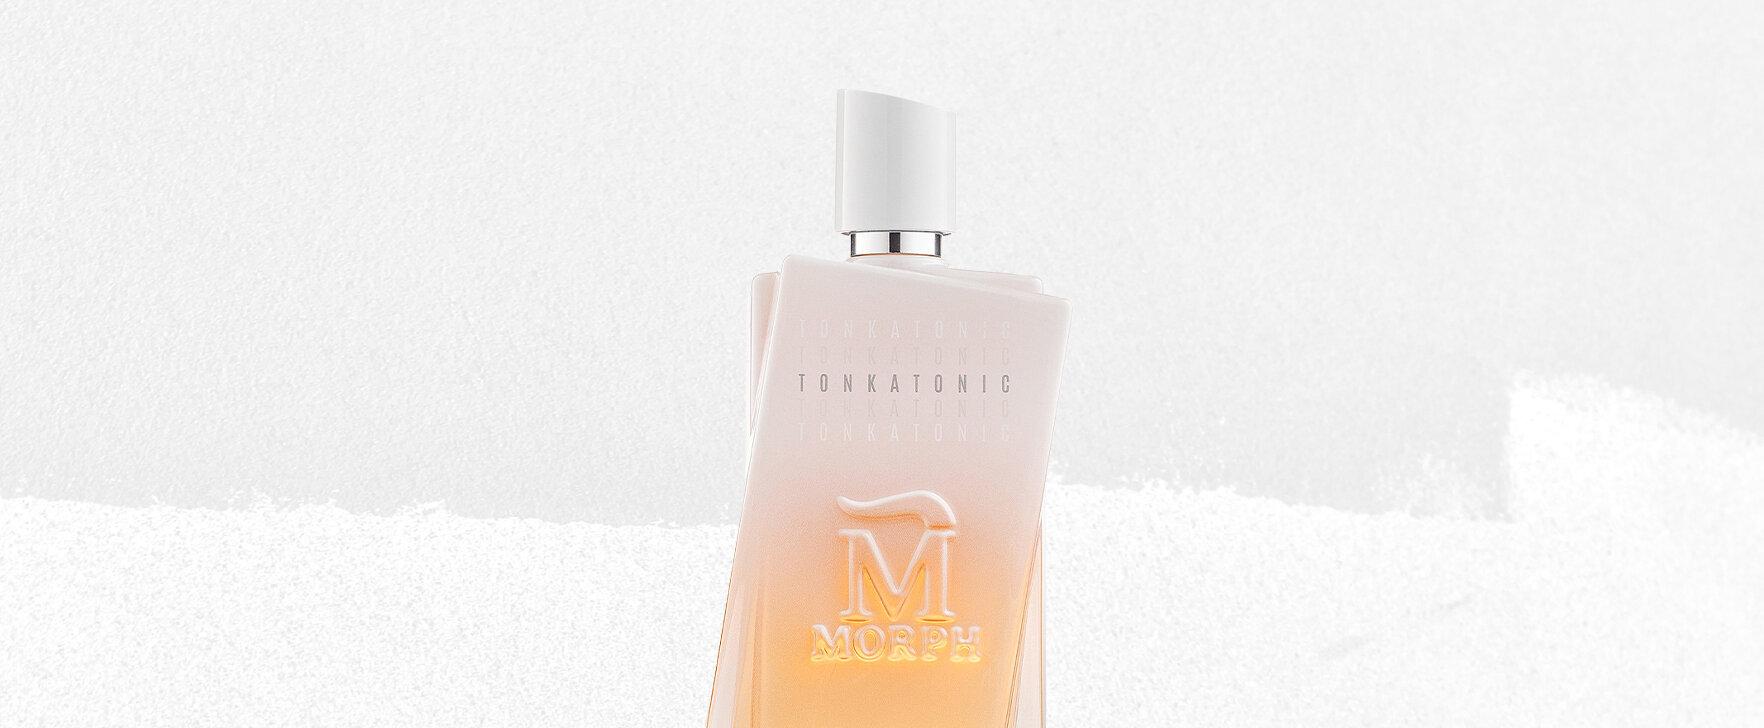 A Touch of Bold Elegance: The New Tonkatonic Eau de Parfum From Morph